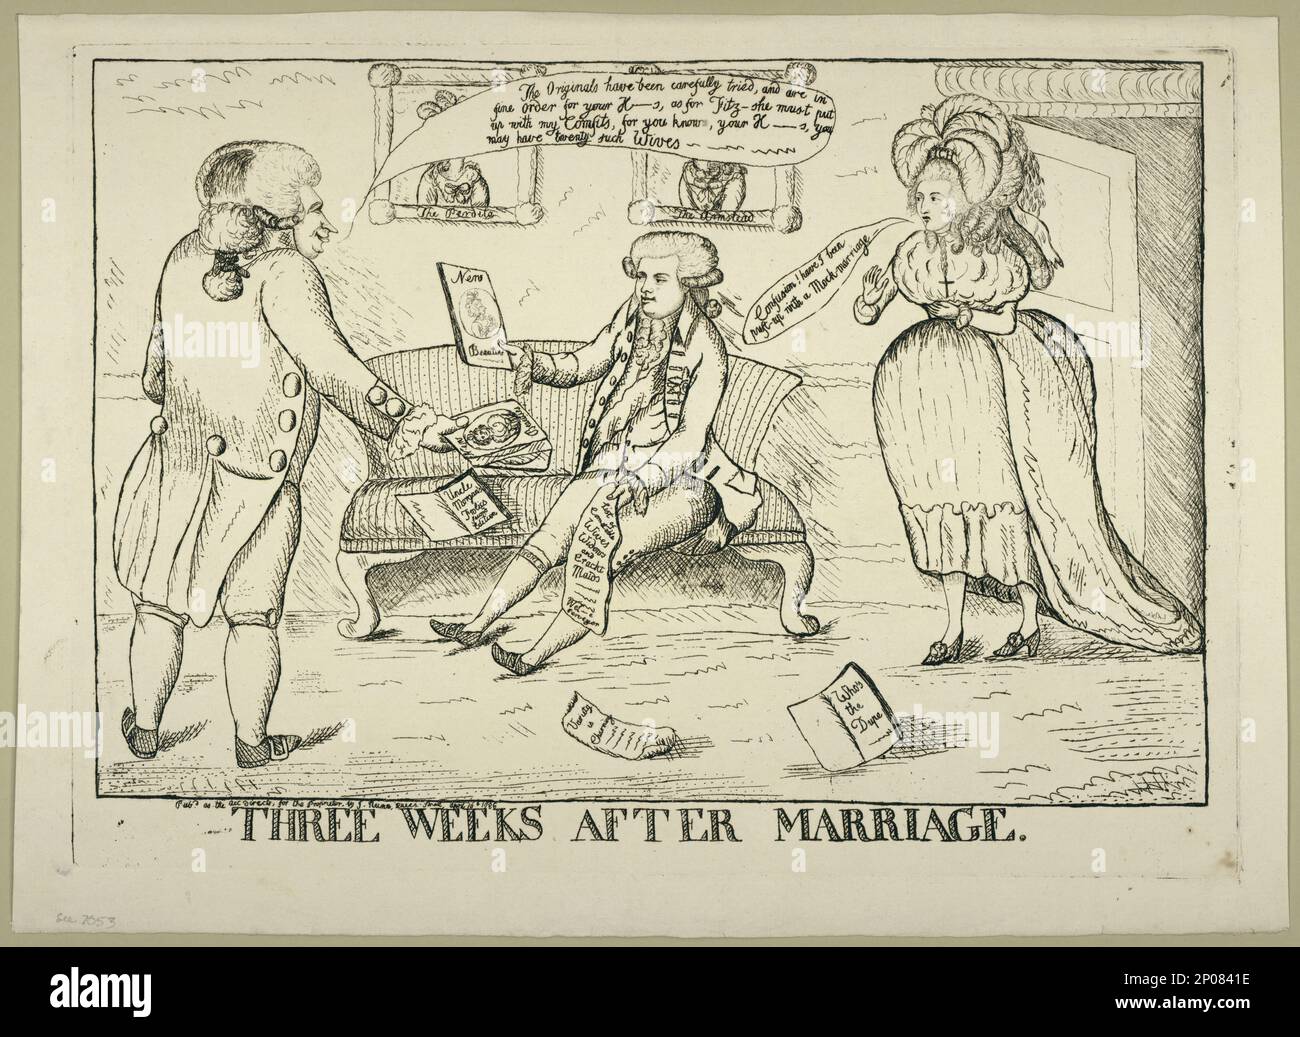 Three weeks after marriage. British Cartoon Prints Collection . George,IV,King of Great Britain,1762-1830. , Fitzherbert, Maria Anne,1756-1837. , Robinson, Mary,1758-1800. , Relations between the sexes,England,1780-1790. Stock Photo